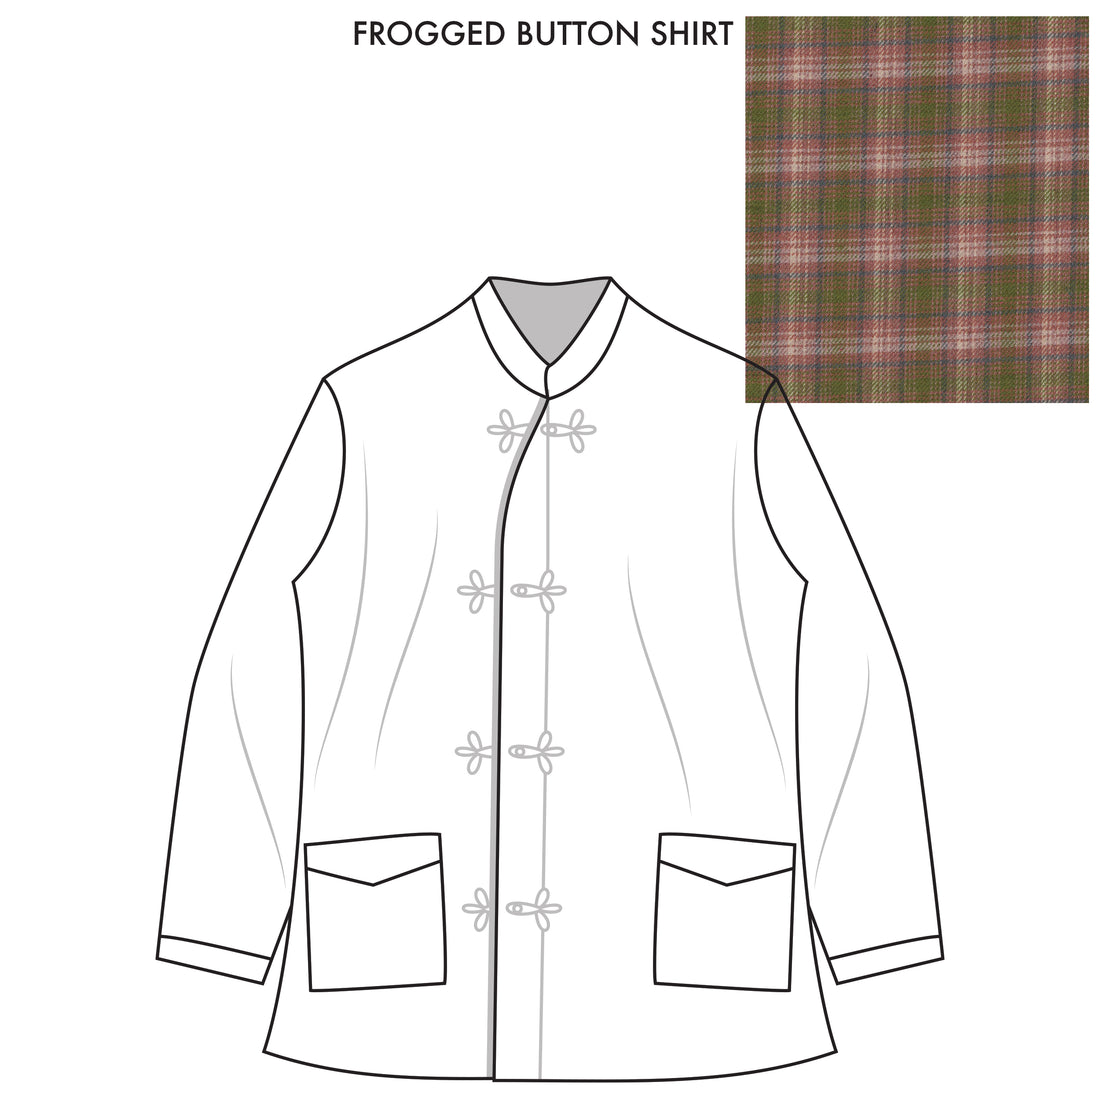 Bryceland’s Frogged Button Shirt Made-to-order Green/Pink Plaid